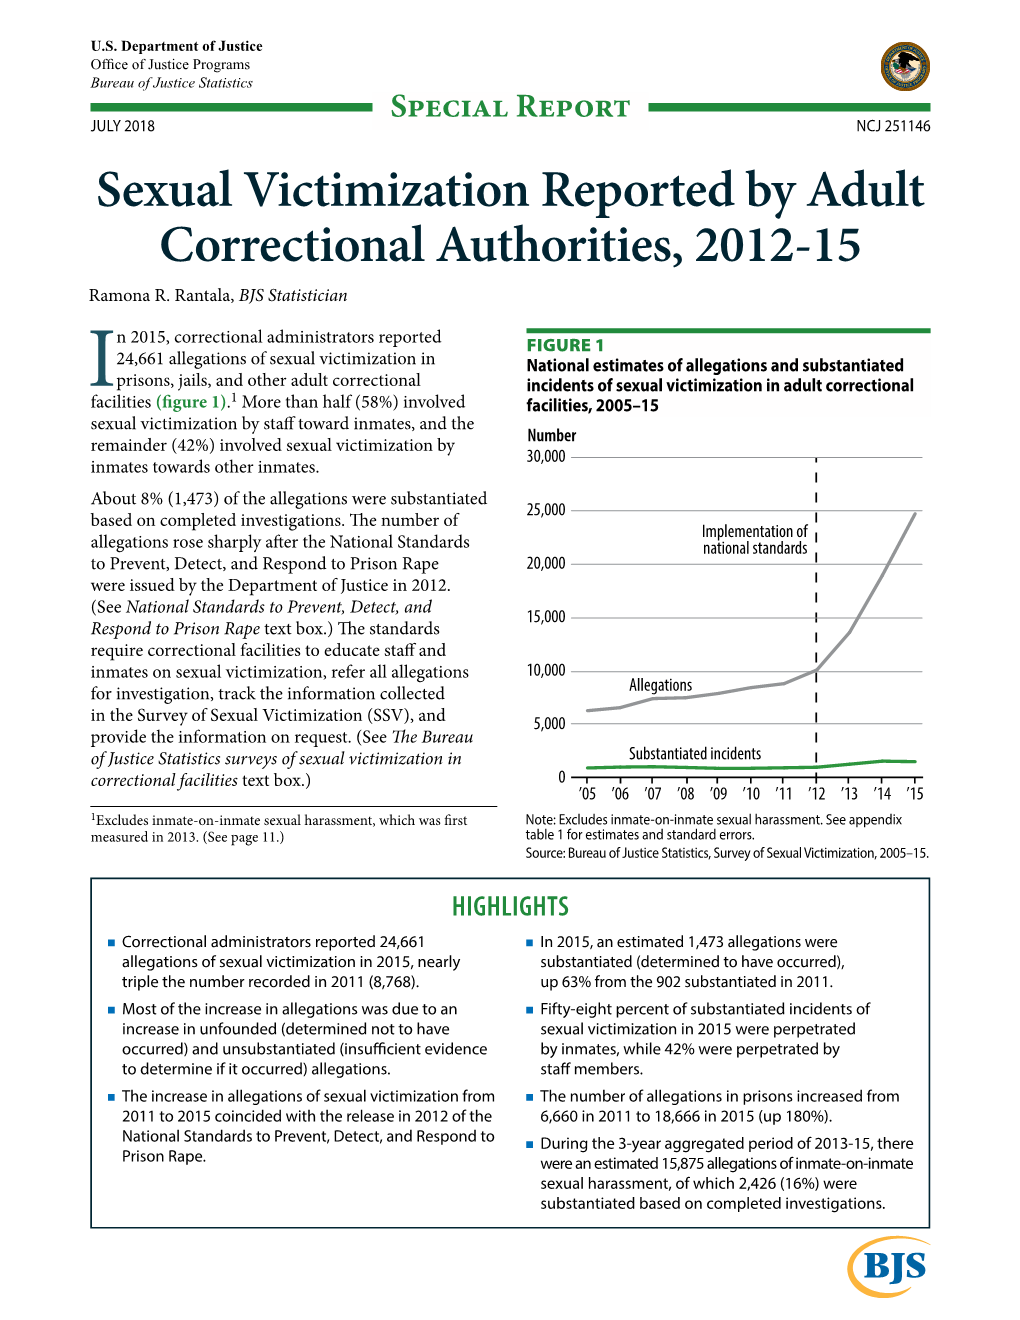 Sexual Victimization Reported by Adult Correctional Authorities, 2012-15 Ramona R